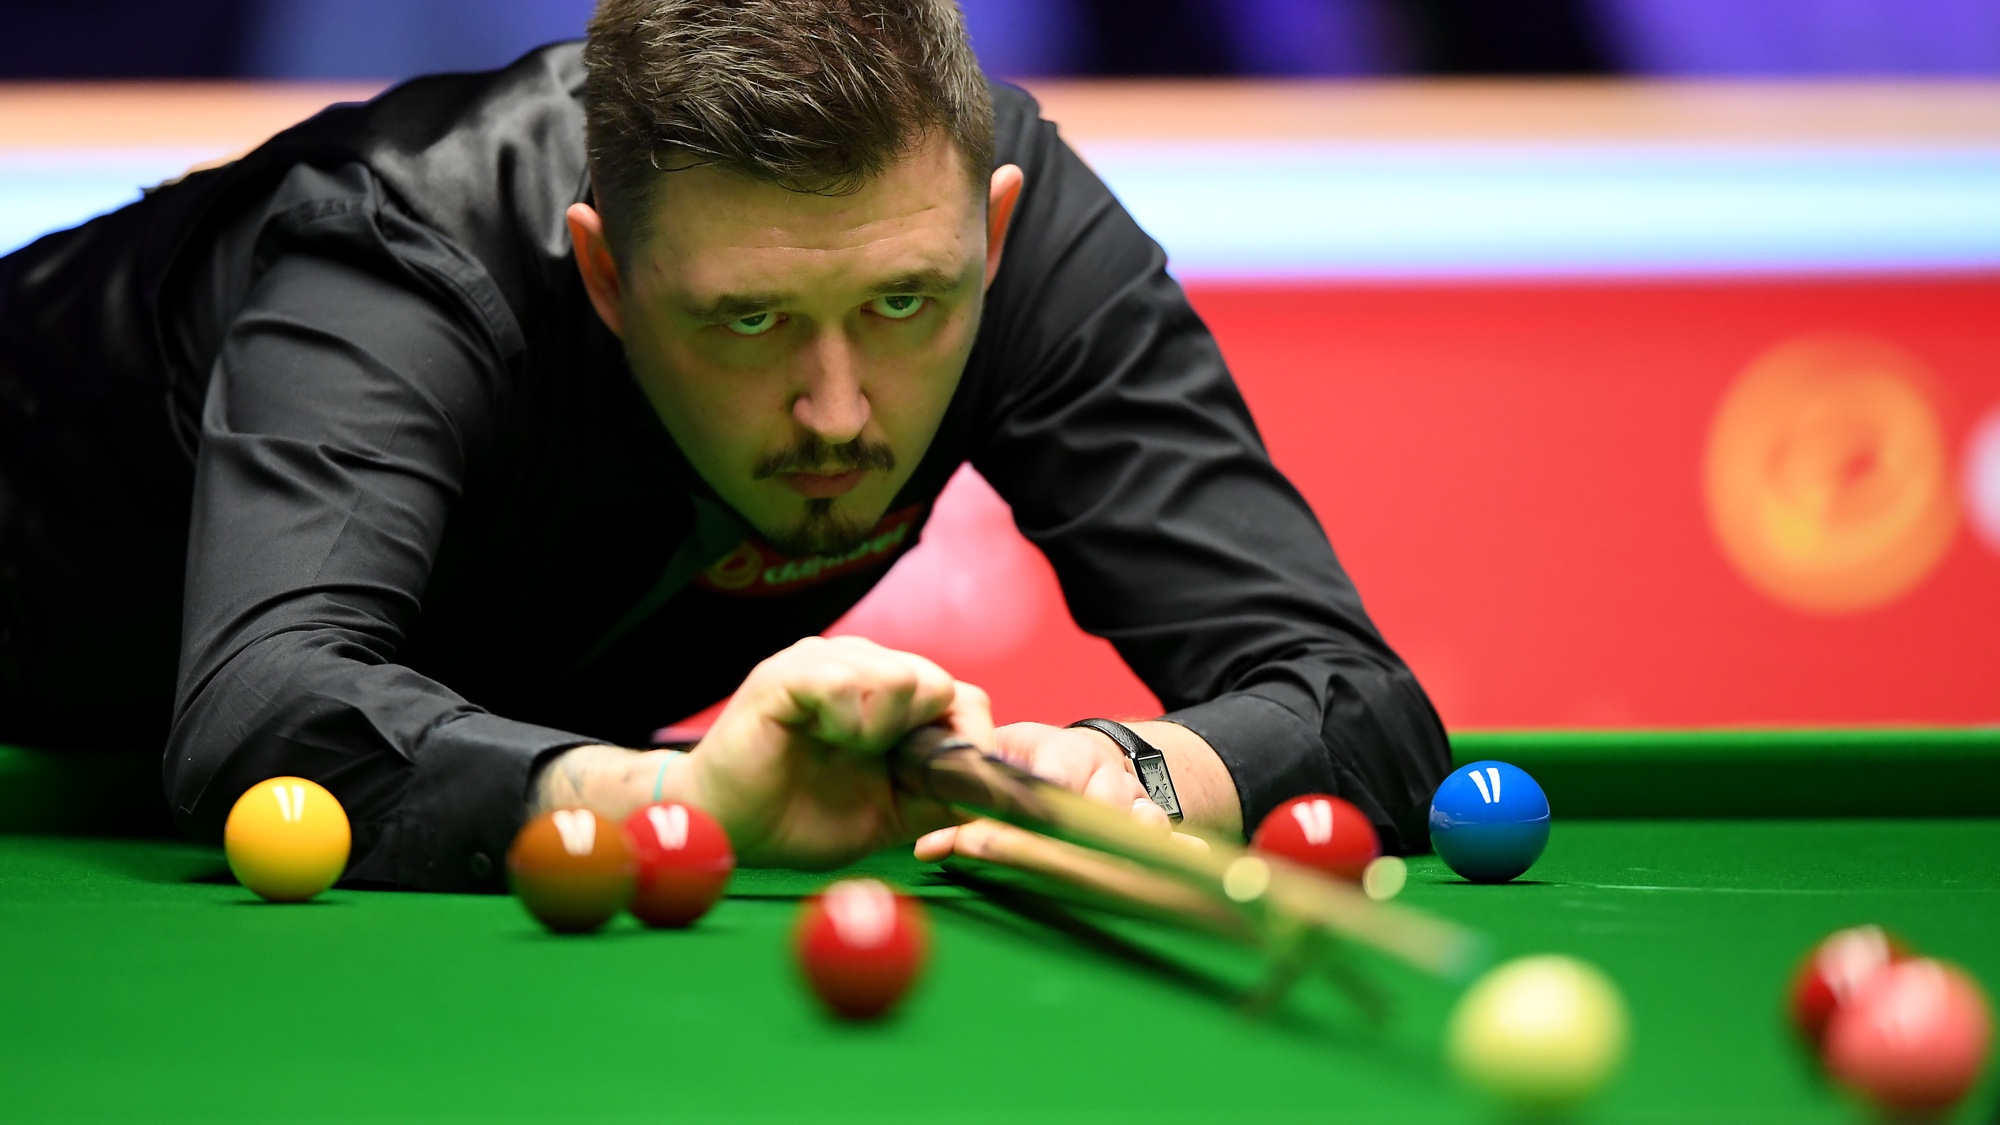 watch snooker championship live